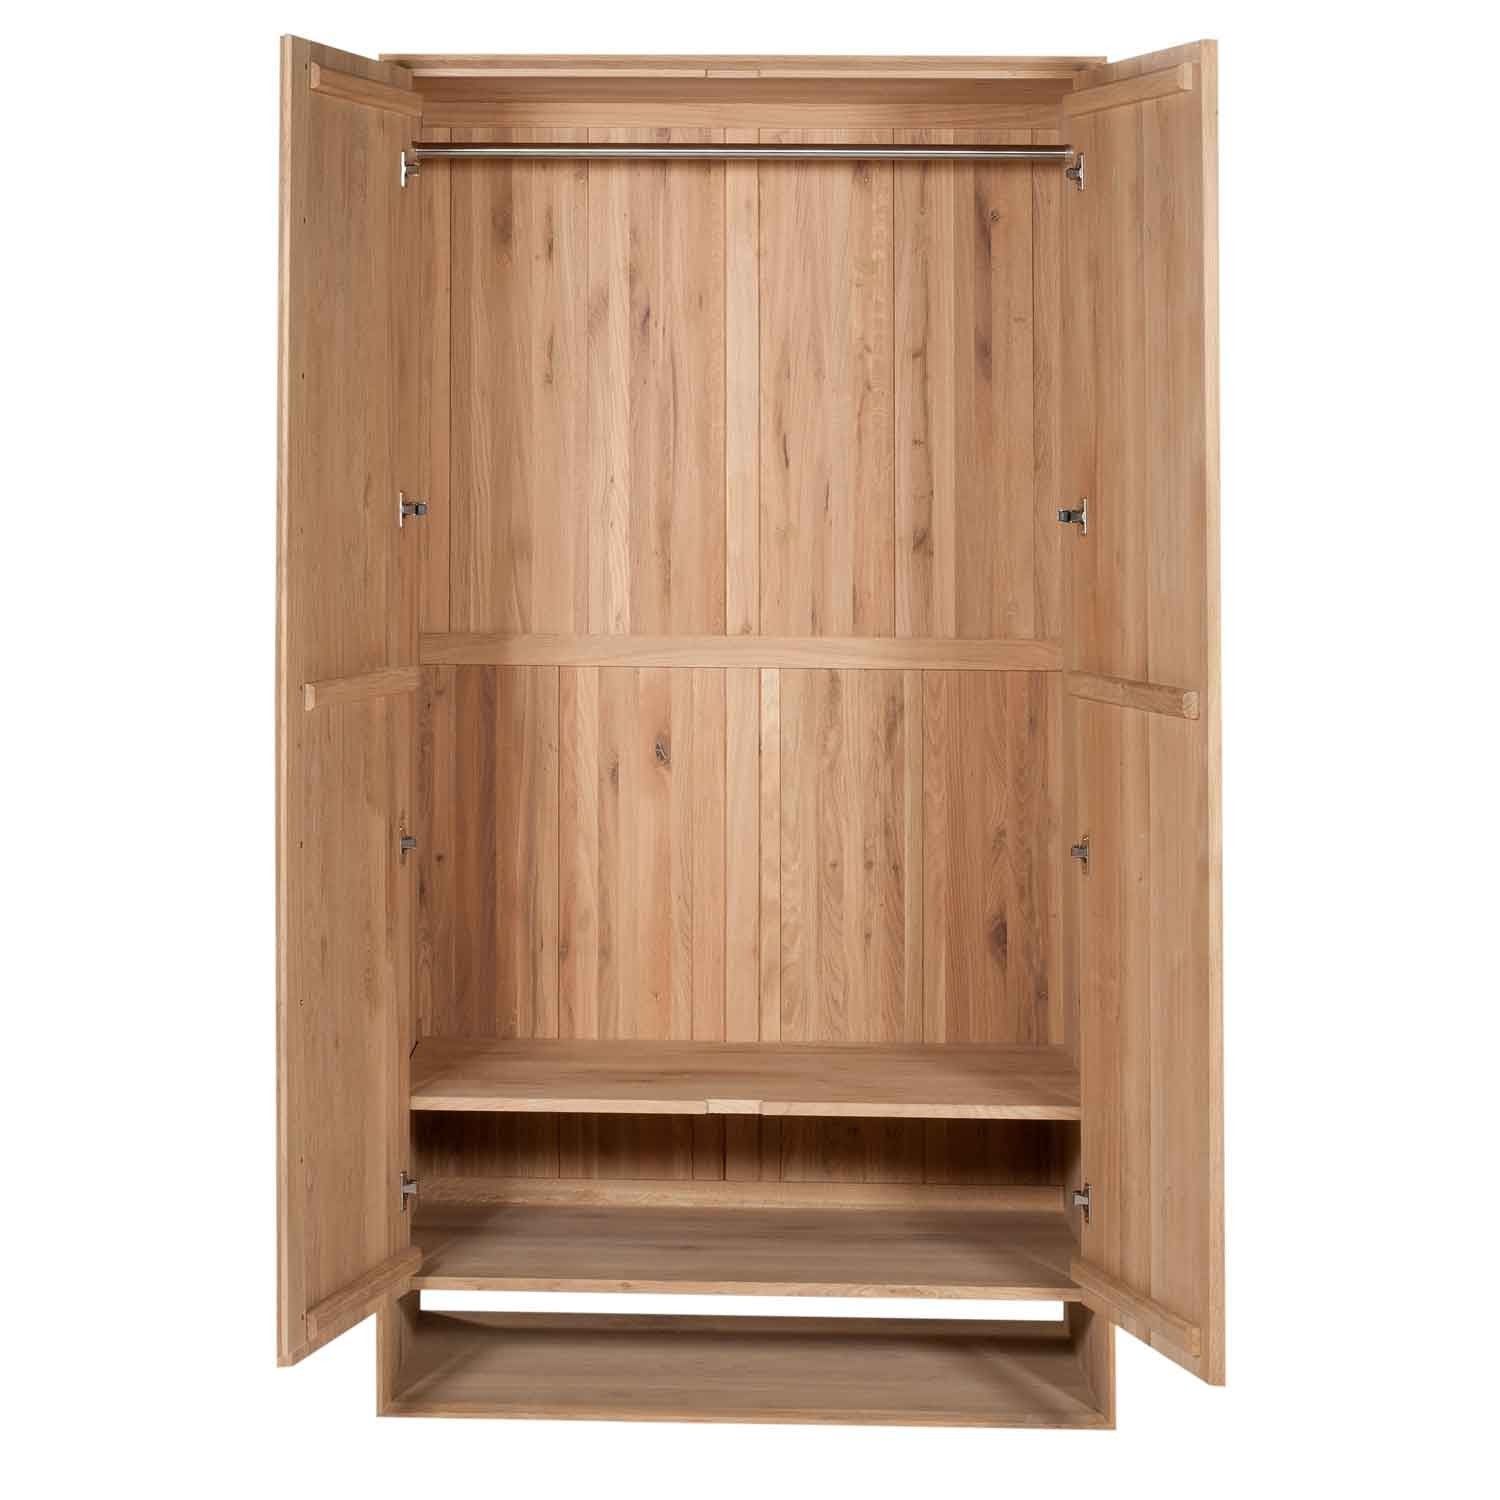 Ethnicraft Nordic Oak 2 Door Wardrobe Solid Wood Furniture Pertaining To Large Wooden Wardrobes (View 13 of 25)